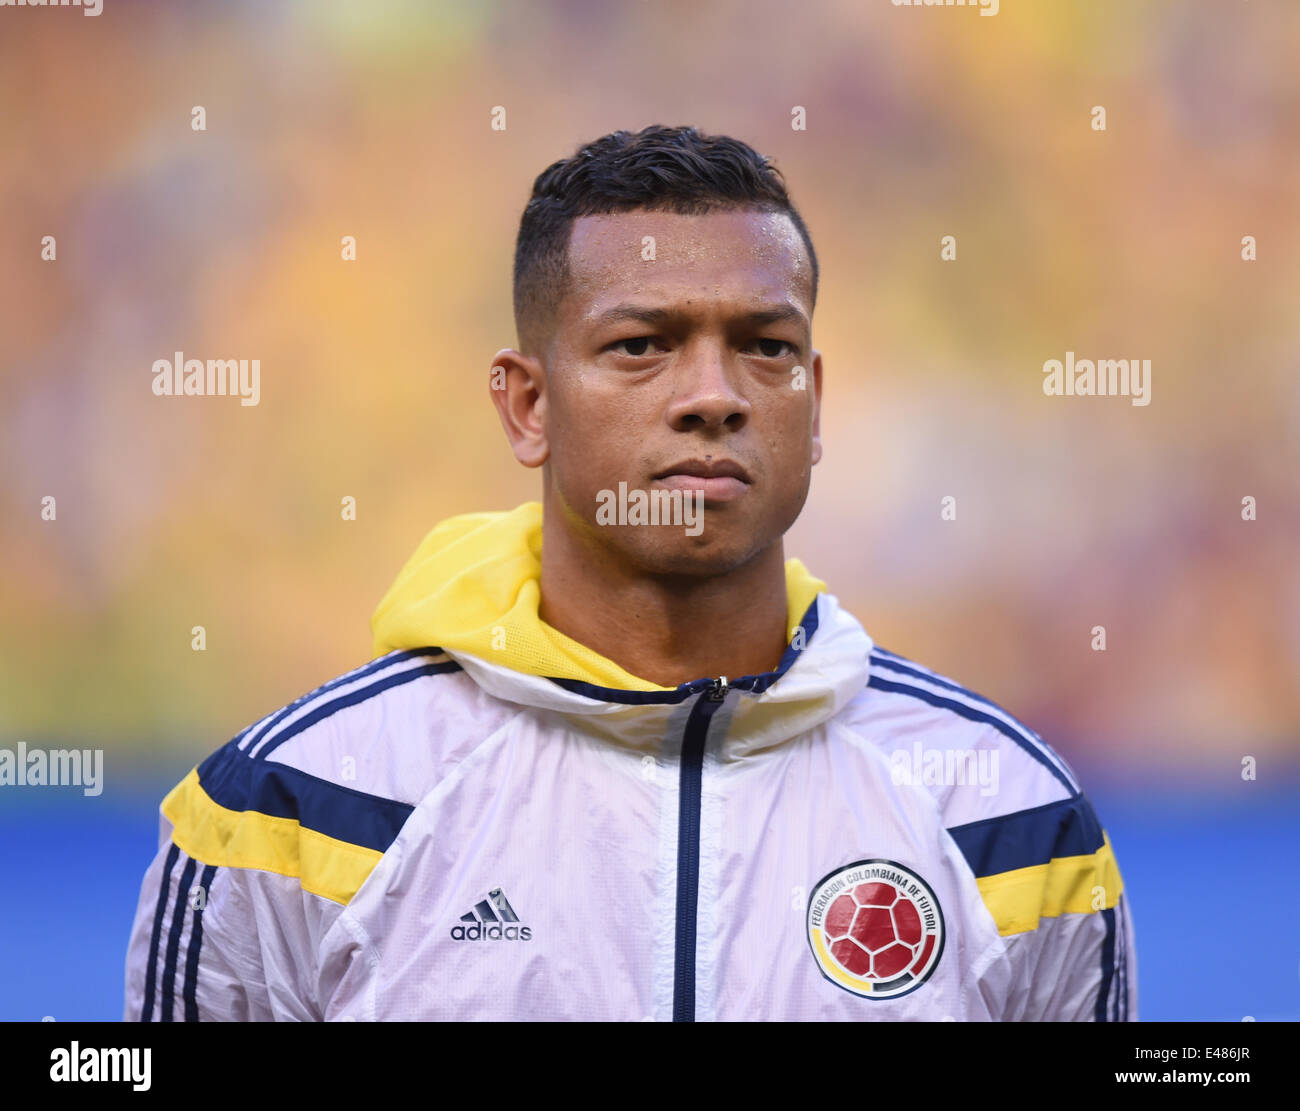 Fortaleza, Brazil. 04th July, 2014. Fredy Guarin of Colombia seen during the FIFA World Cup 2014 quarter final match soccer between Brazil and Colombia at the Estadio Castelao in Fortaleza, Brazil, 04 July 2014. Photo: Marius Becker/dpa/Alamy Live News Stock Photo